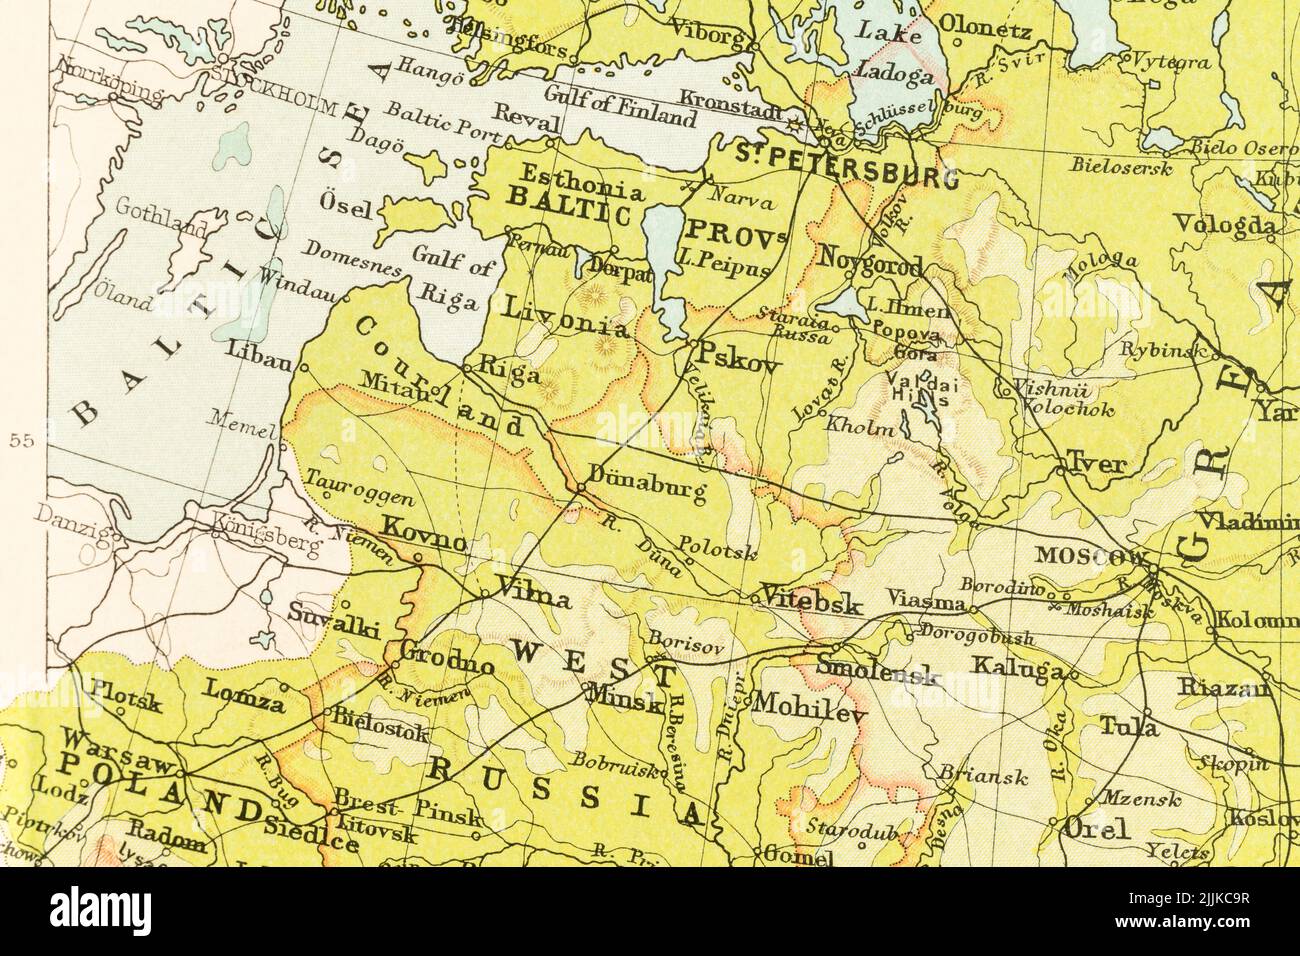 Early 1900s atlas map of Russia and Baltic states - Estonia, Latvia, Lithuania under pre-Soviet Russia control, also Warsaw / Poland and Belarus. Stock Photo